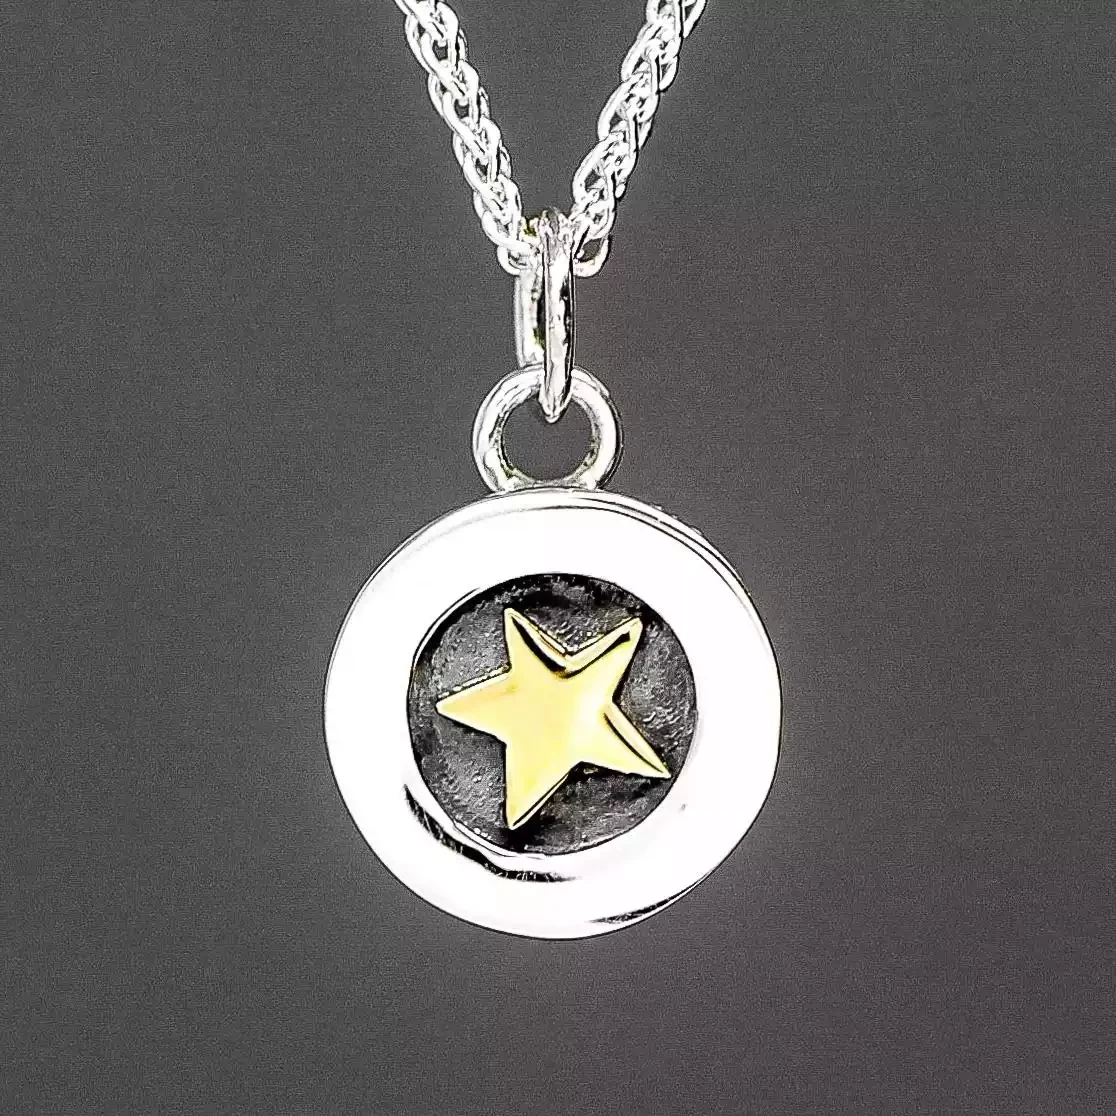 Twilight Star Silver and Gold Pendant - Small by Linda Macdonald